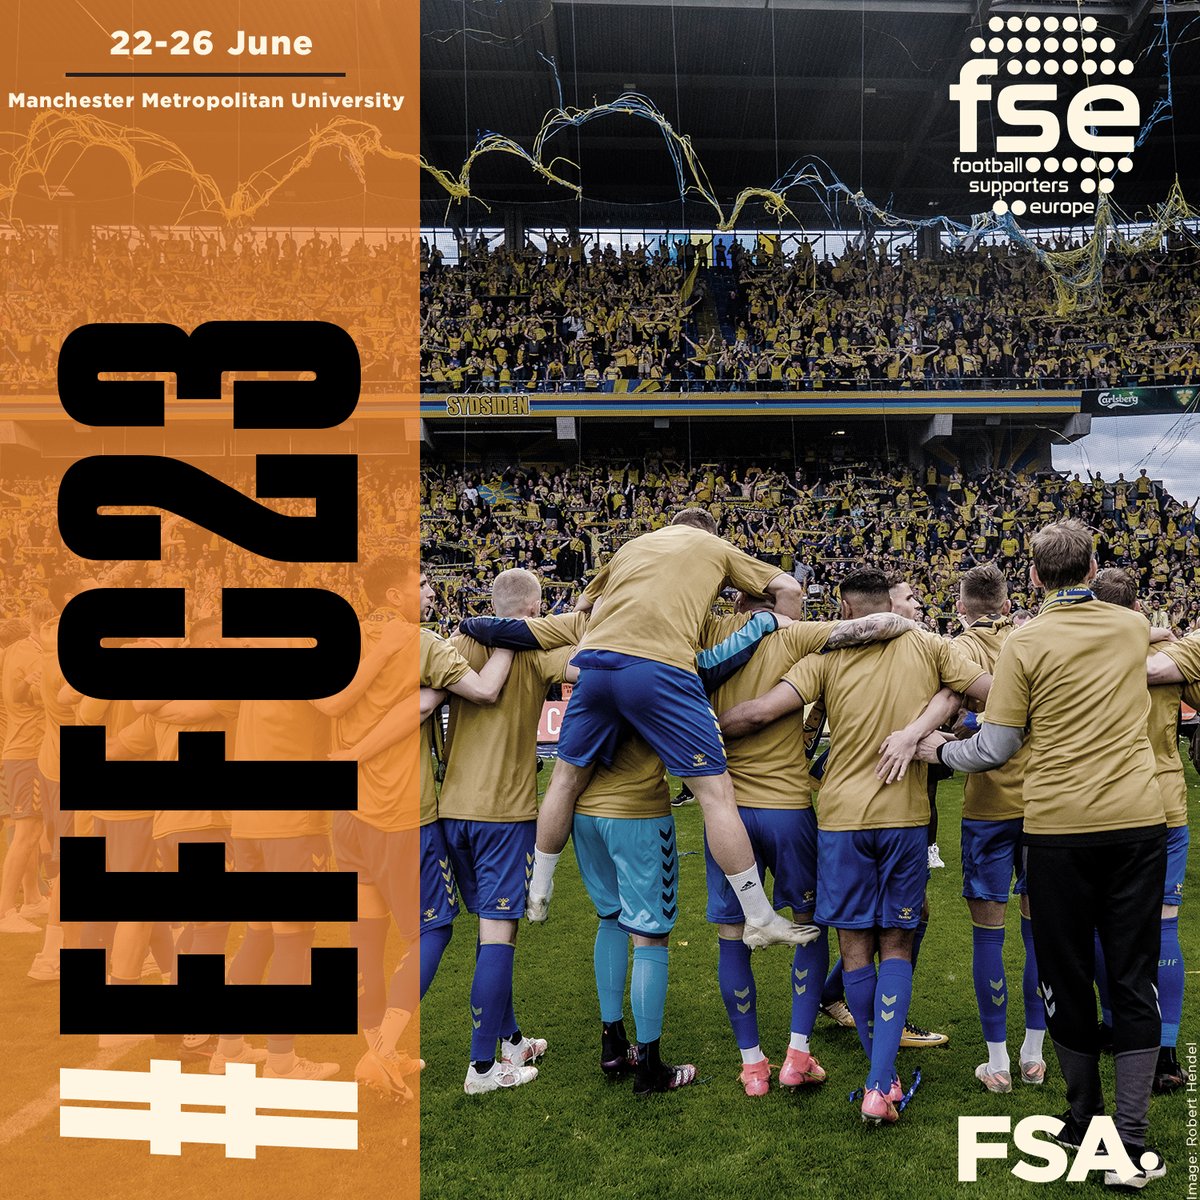 Fans from across Europe will be descending on Manchester this summer to talk about the future of the game at the European Football Fans' Congress.

Register now & get involved: thefsa.org.uk/news/effc23-re… #EFFC23